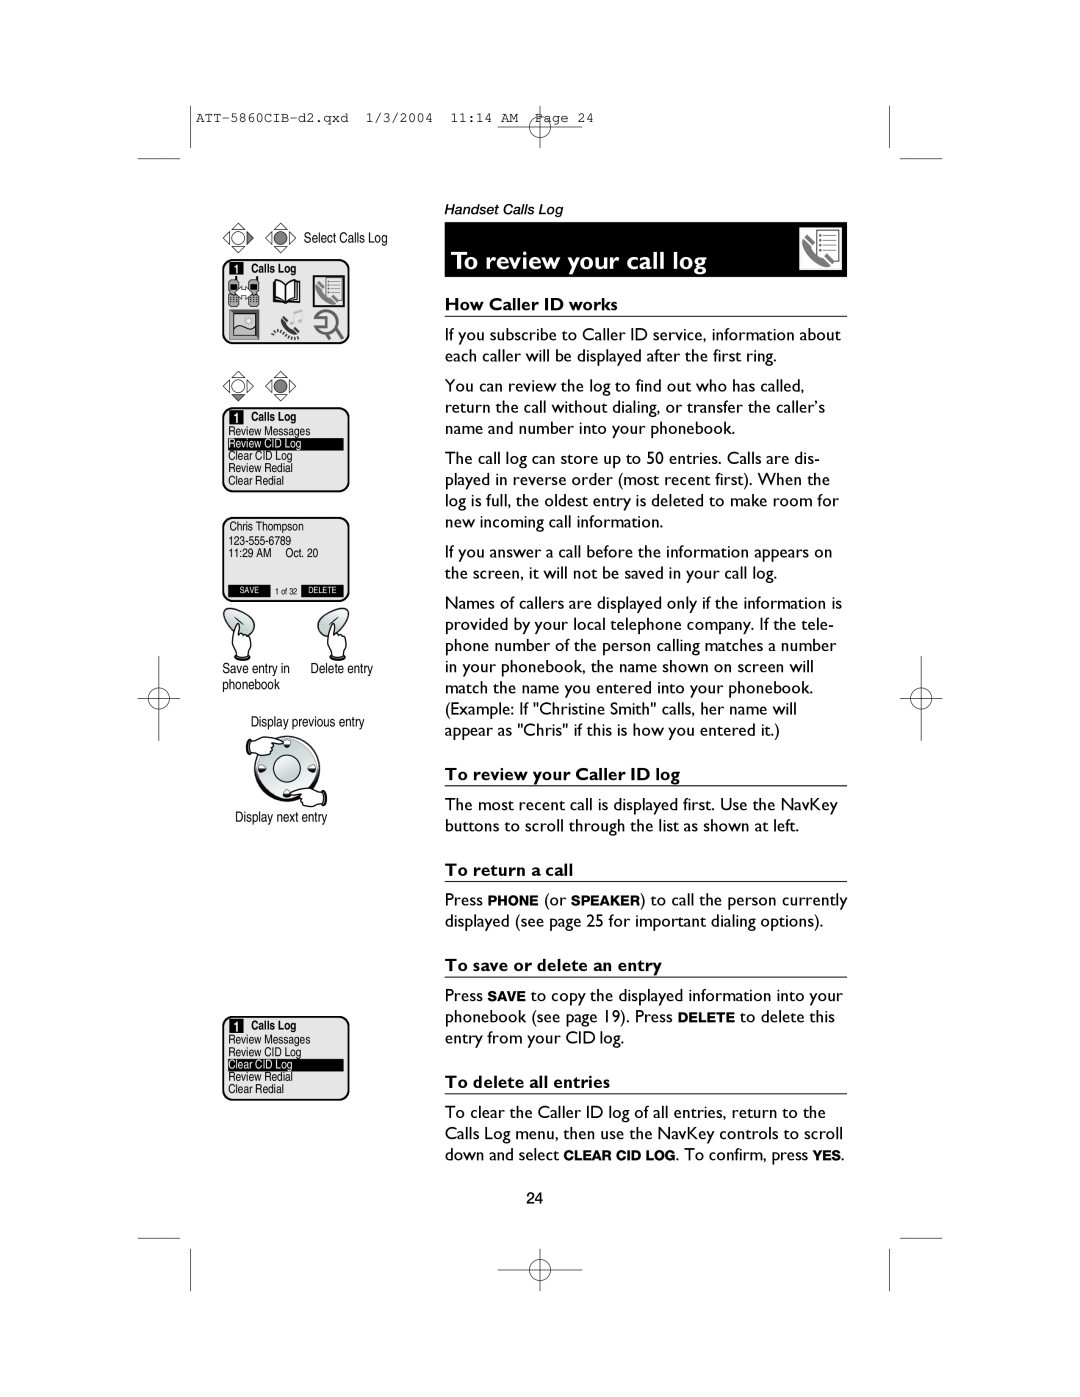 AT&T E5860 user manual To review your call log, How Caller ID works, To review your Caller ID log, To return a call 